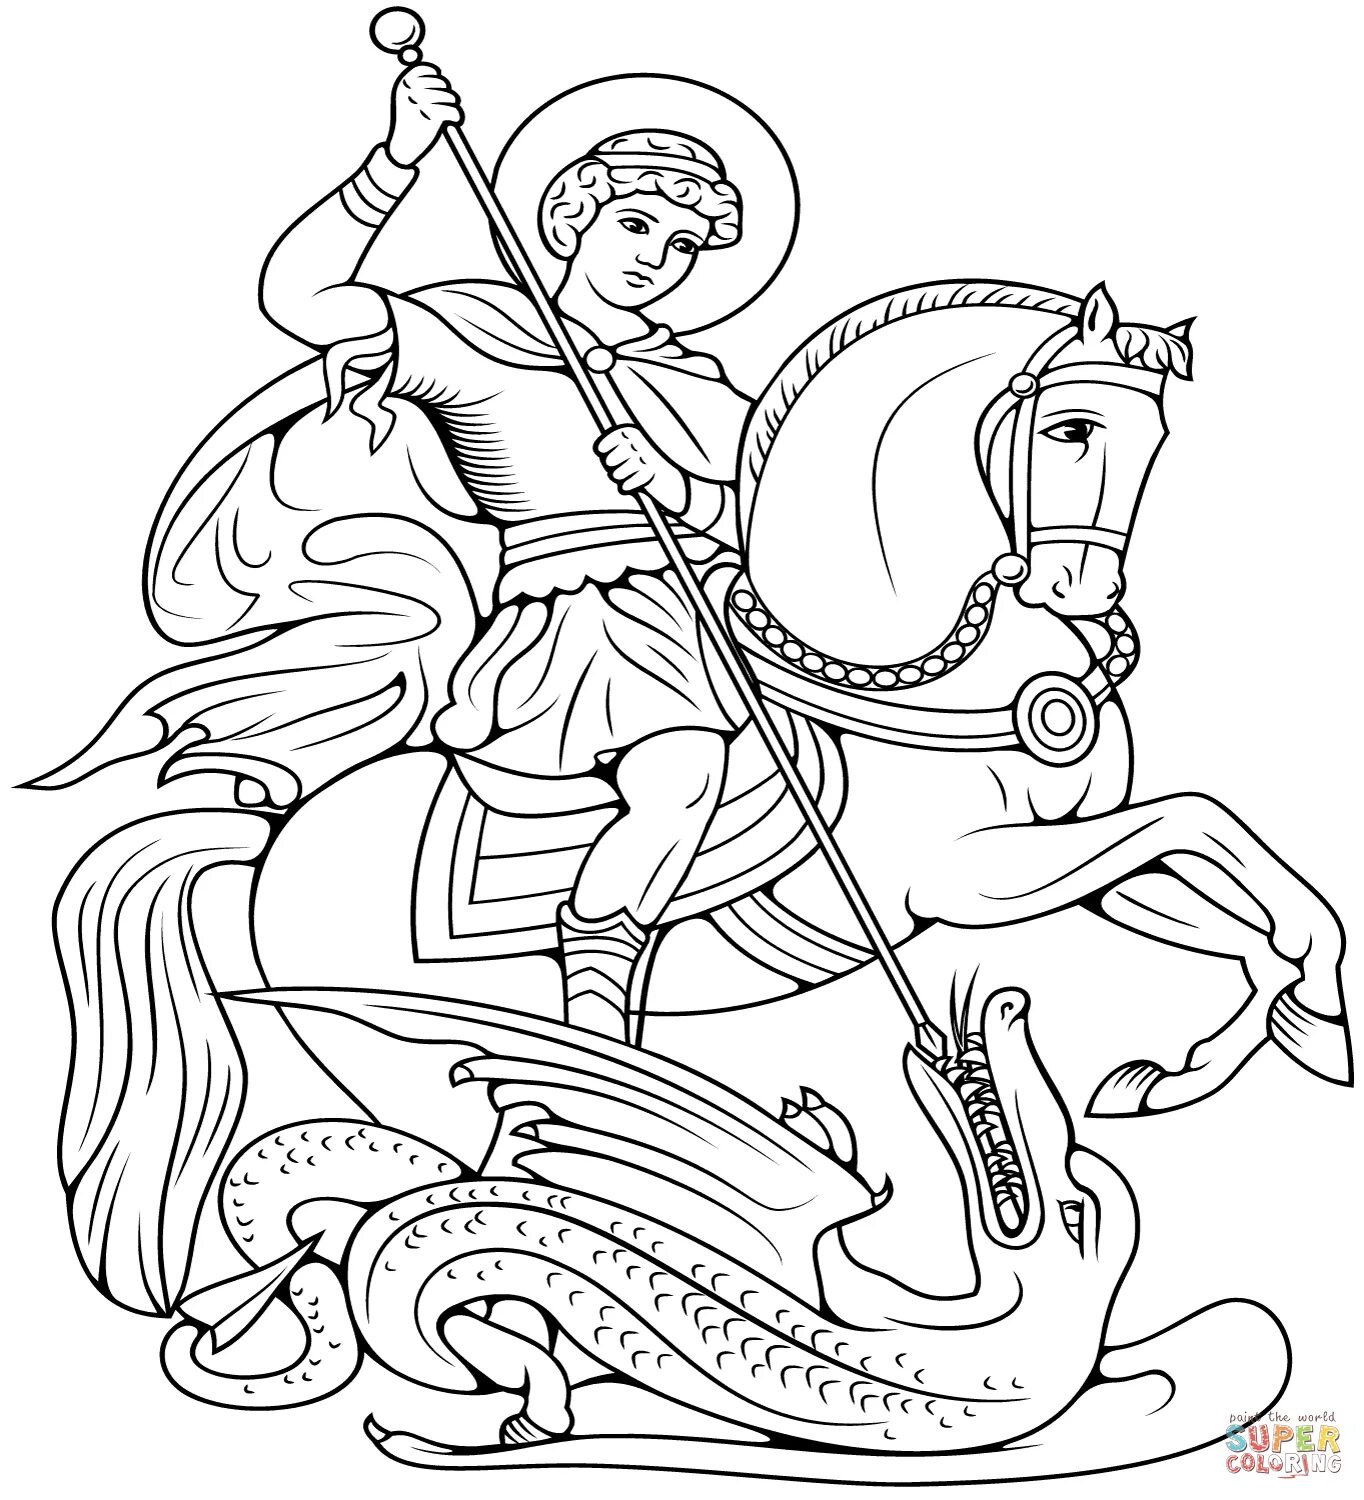 George the Victorious inspirational coloring book